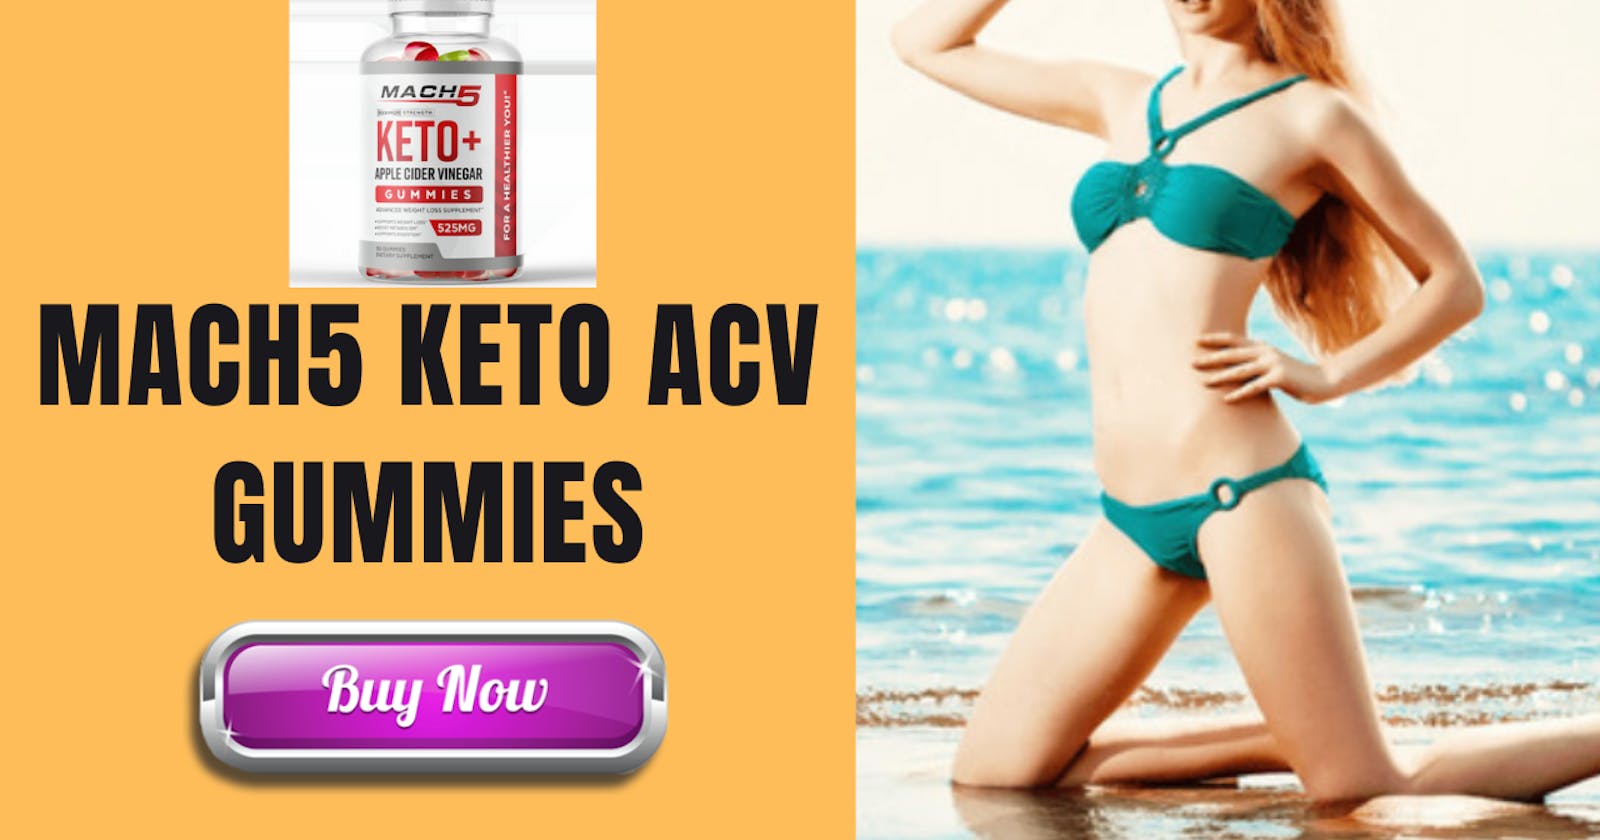 Mach5 Keto ACV Gummies Reviews : Safe Weight Loss Pills Or Scam? Offers